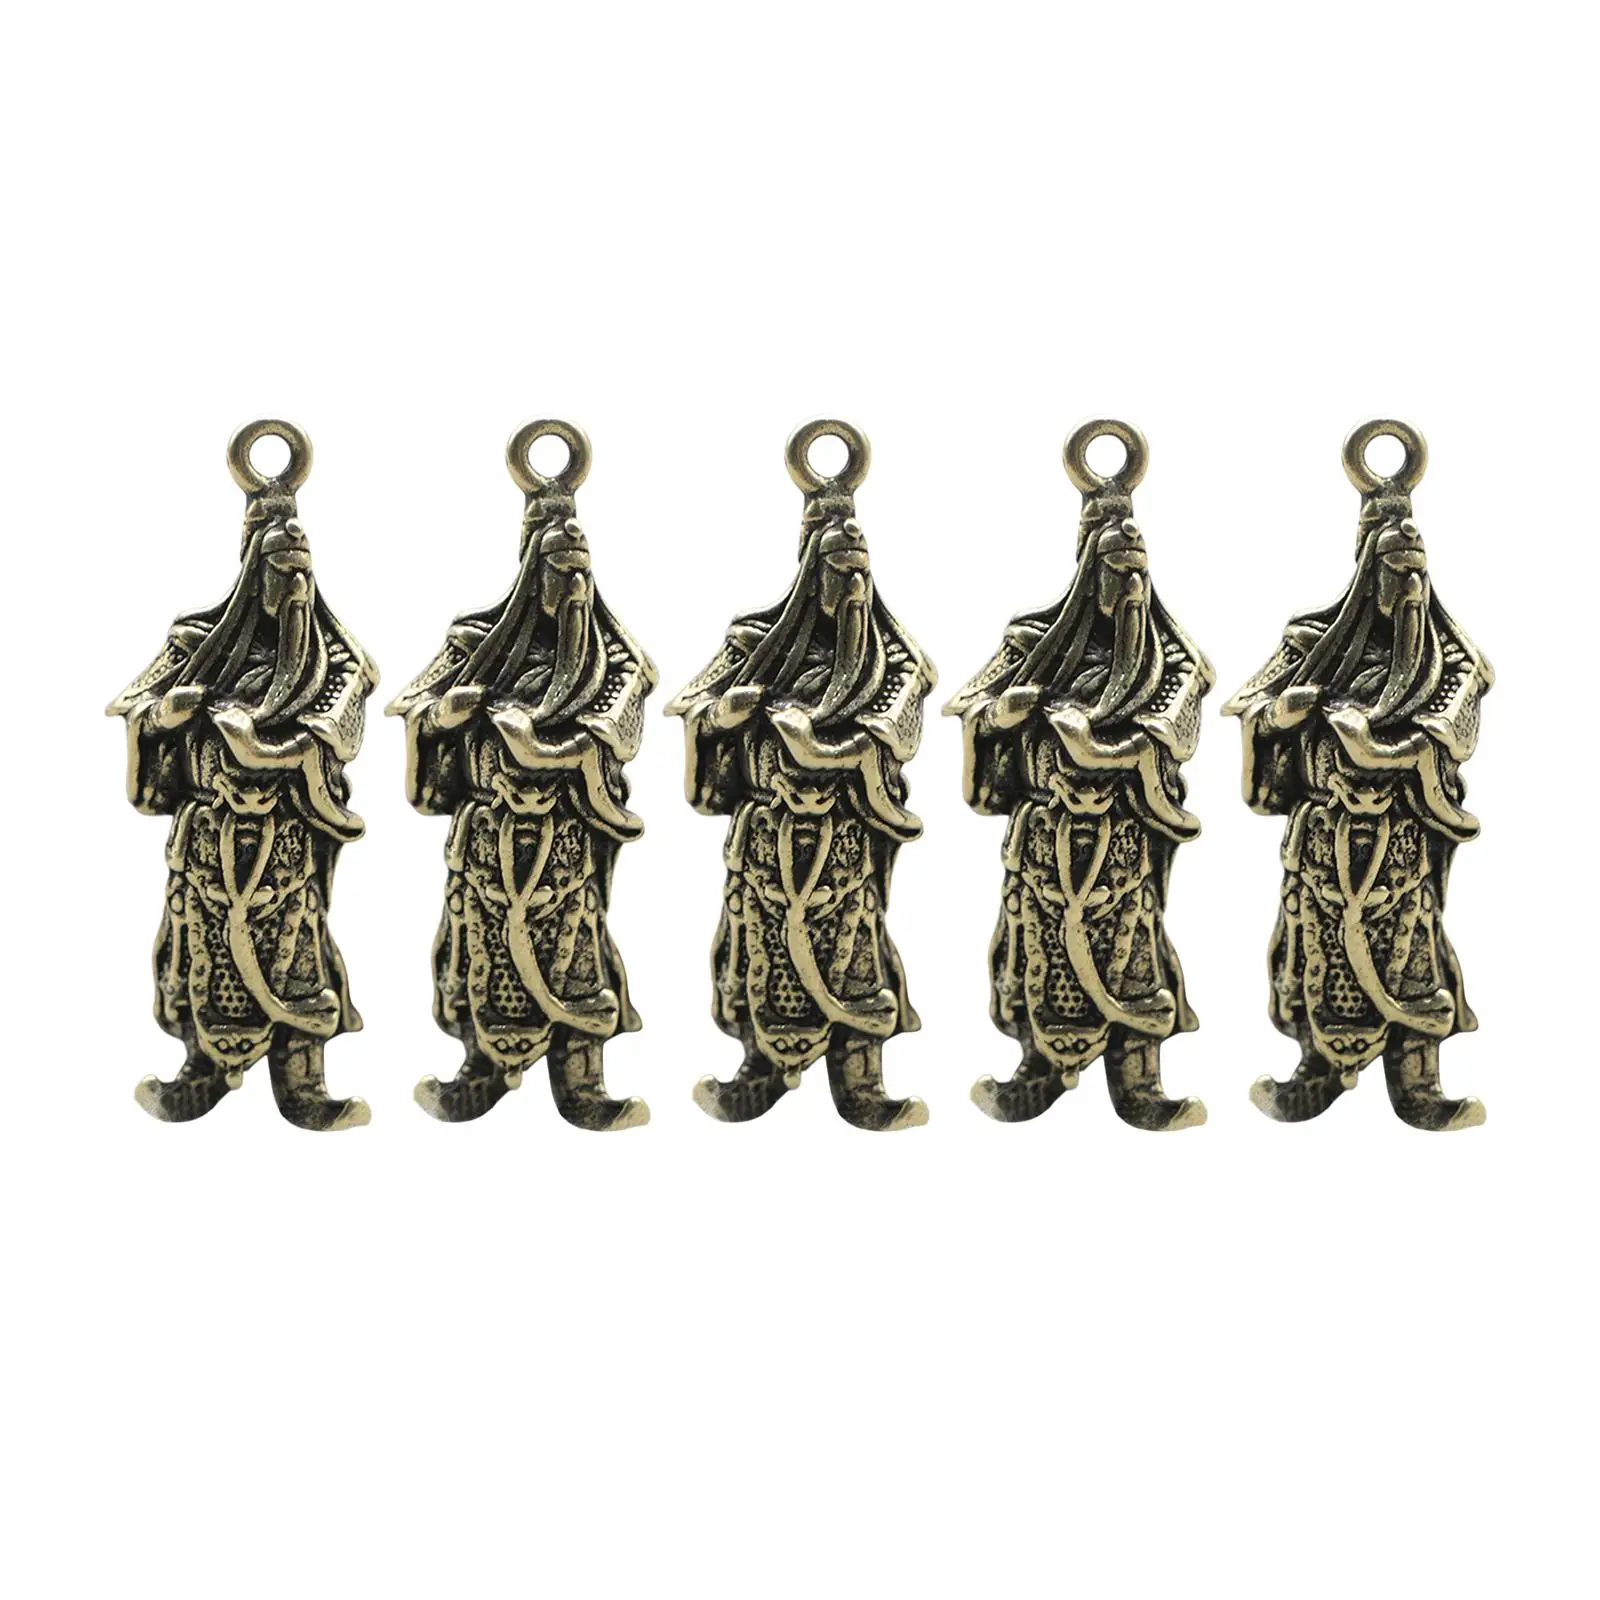 5Pcs Chinese Small Statues Figurine Ornaments Pendant Charm Collectible for Decor Home Decoration Keychains Findings Necklace